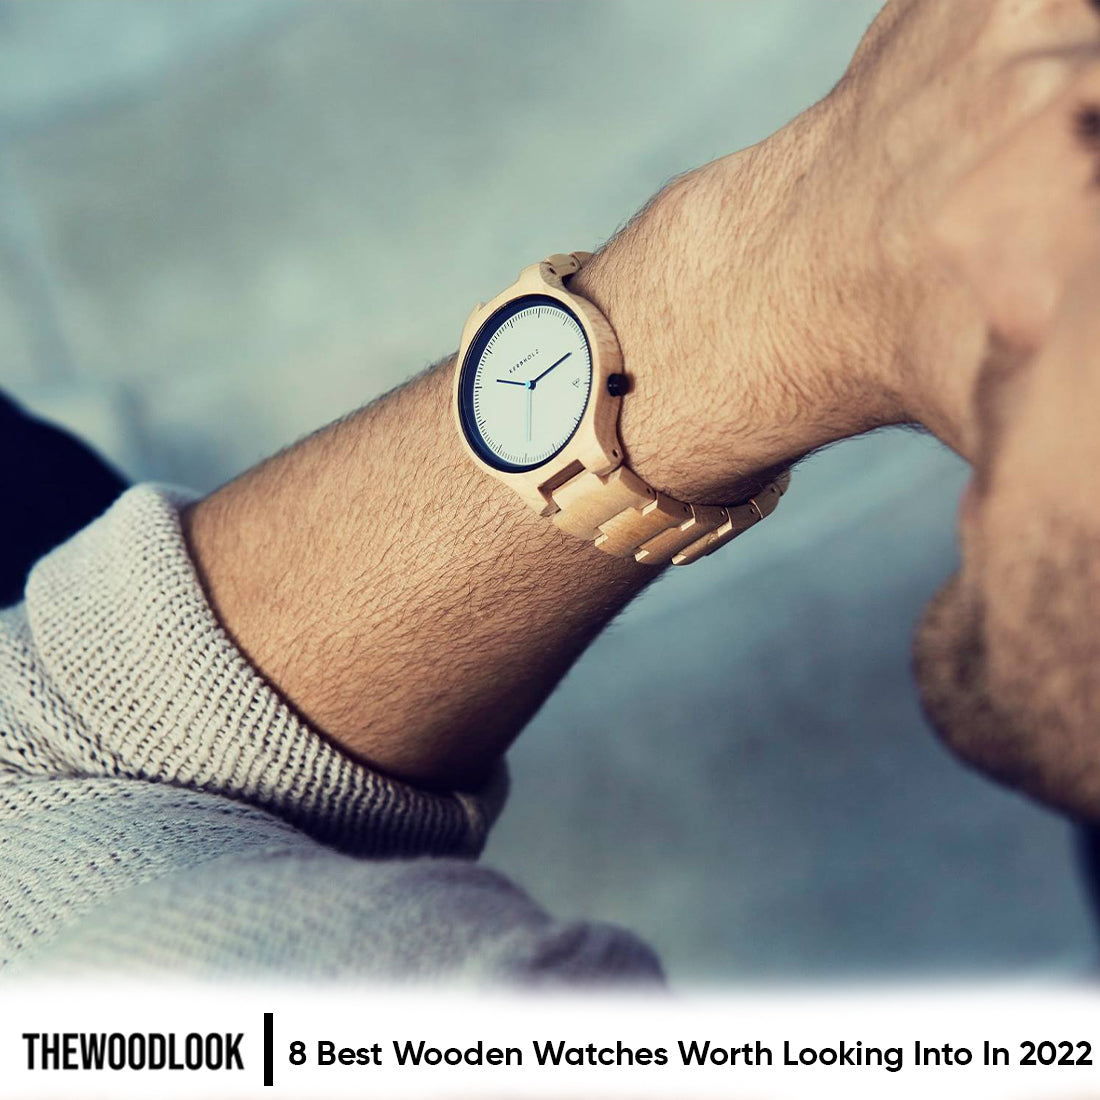 8 Best Wooden Watches Worth Looking Into in 2022